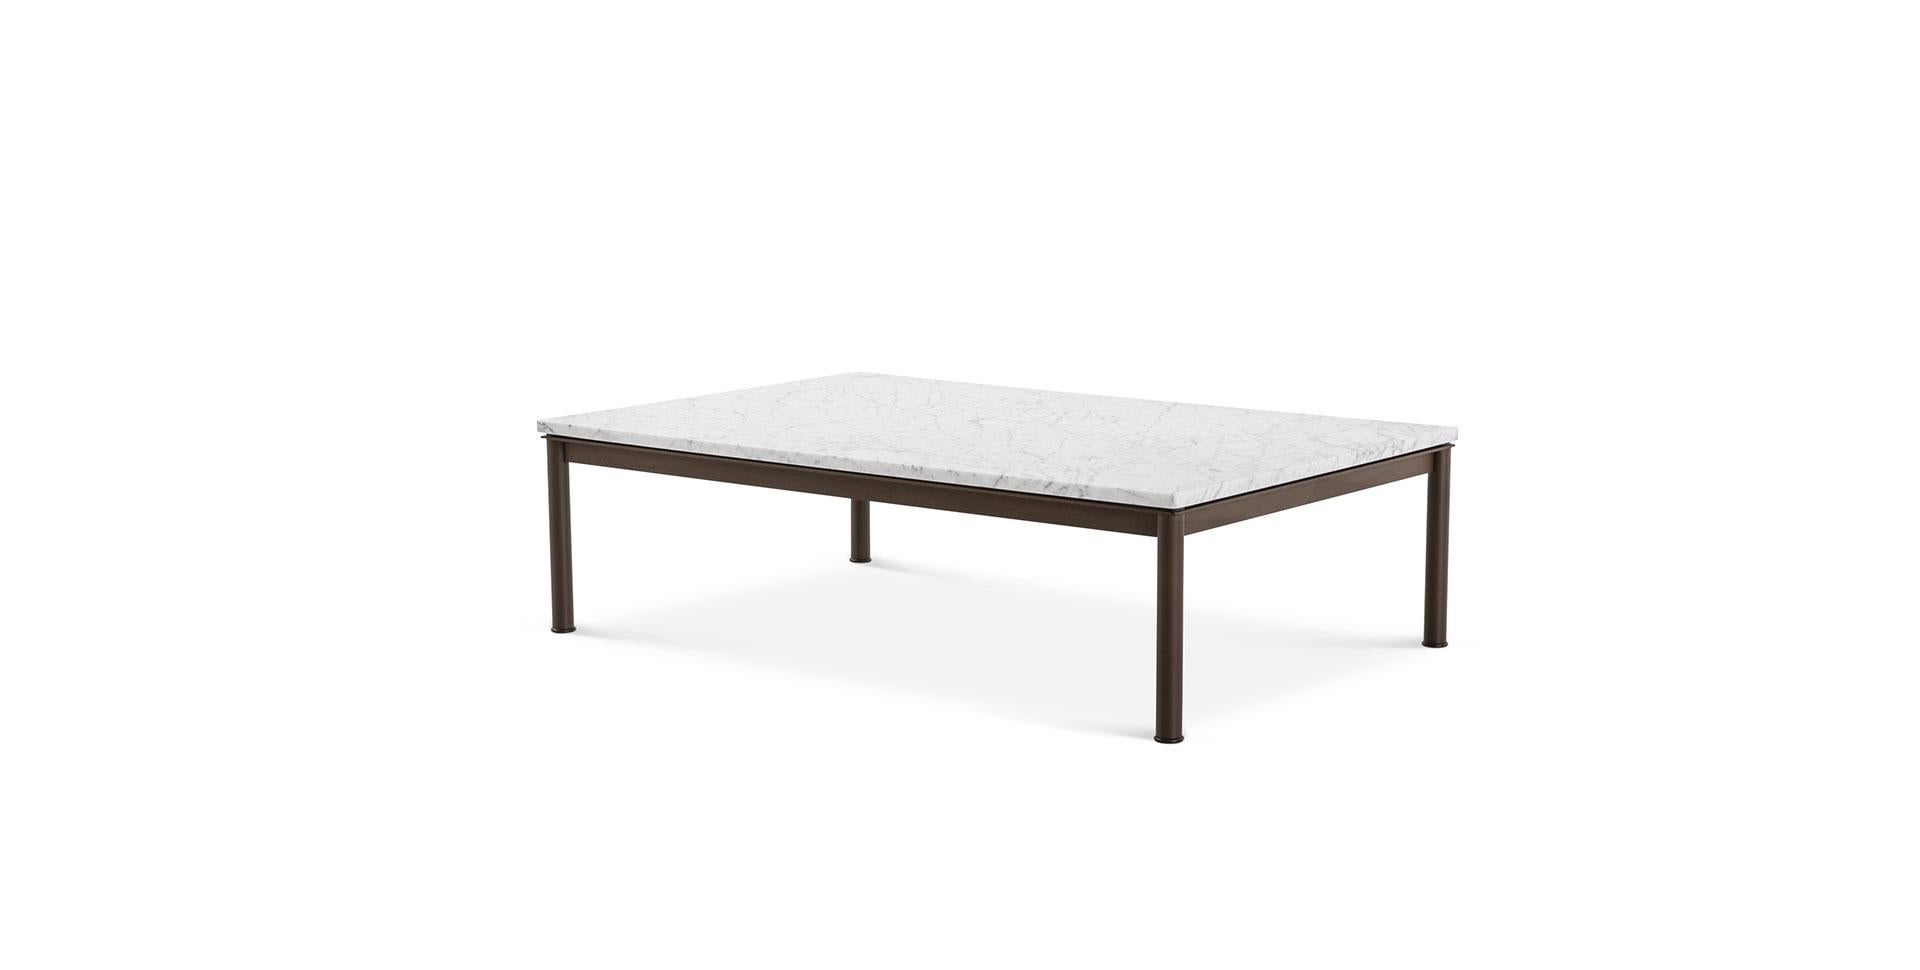 Italian Le Corbusier, Pierre Jeanneret, Charlotte Perriand LC10 Table by Cassina